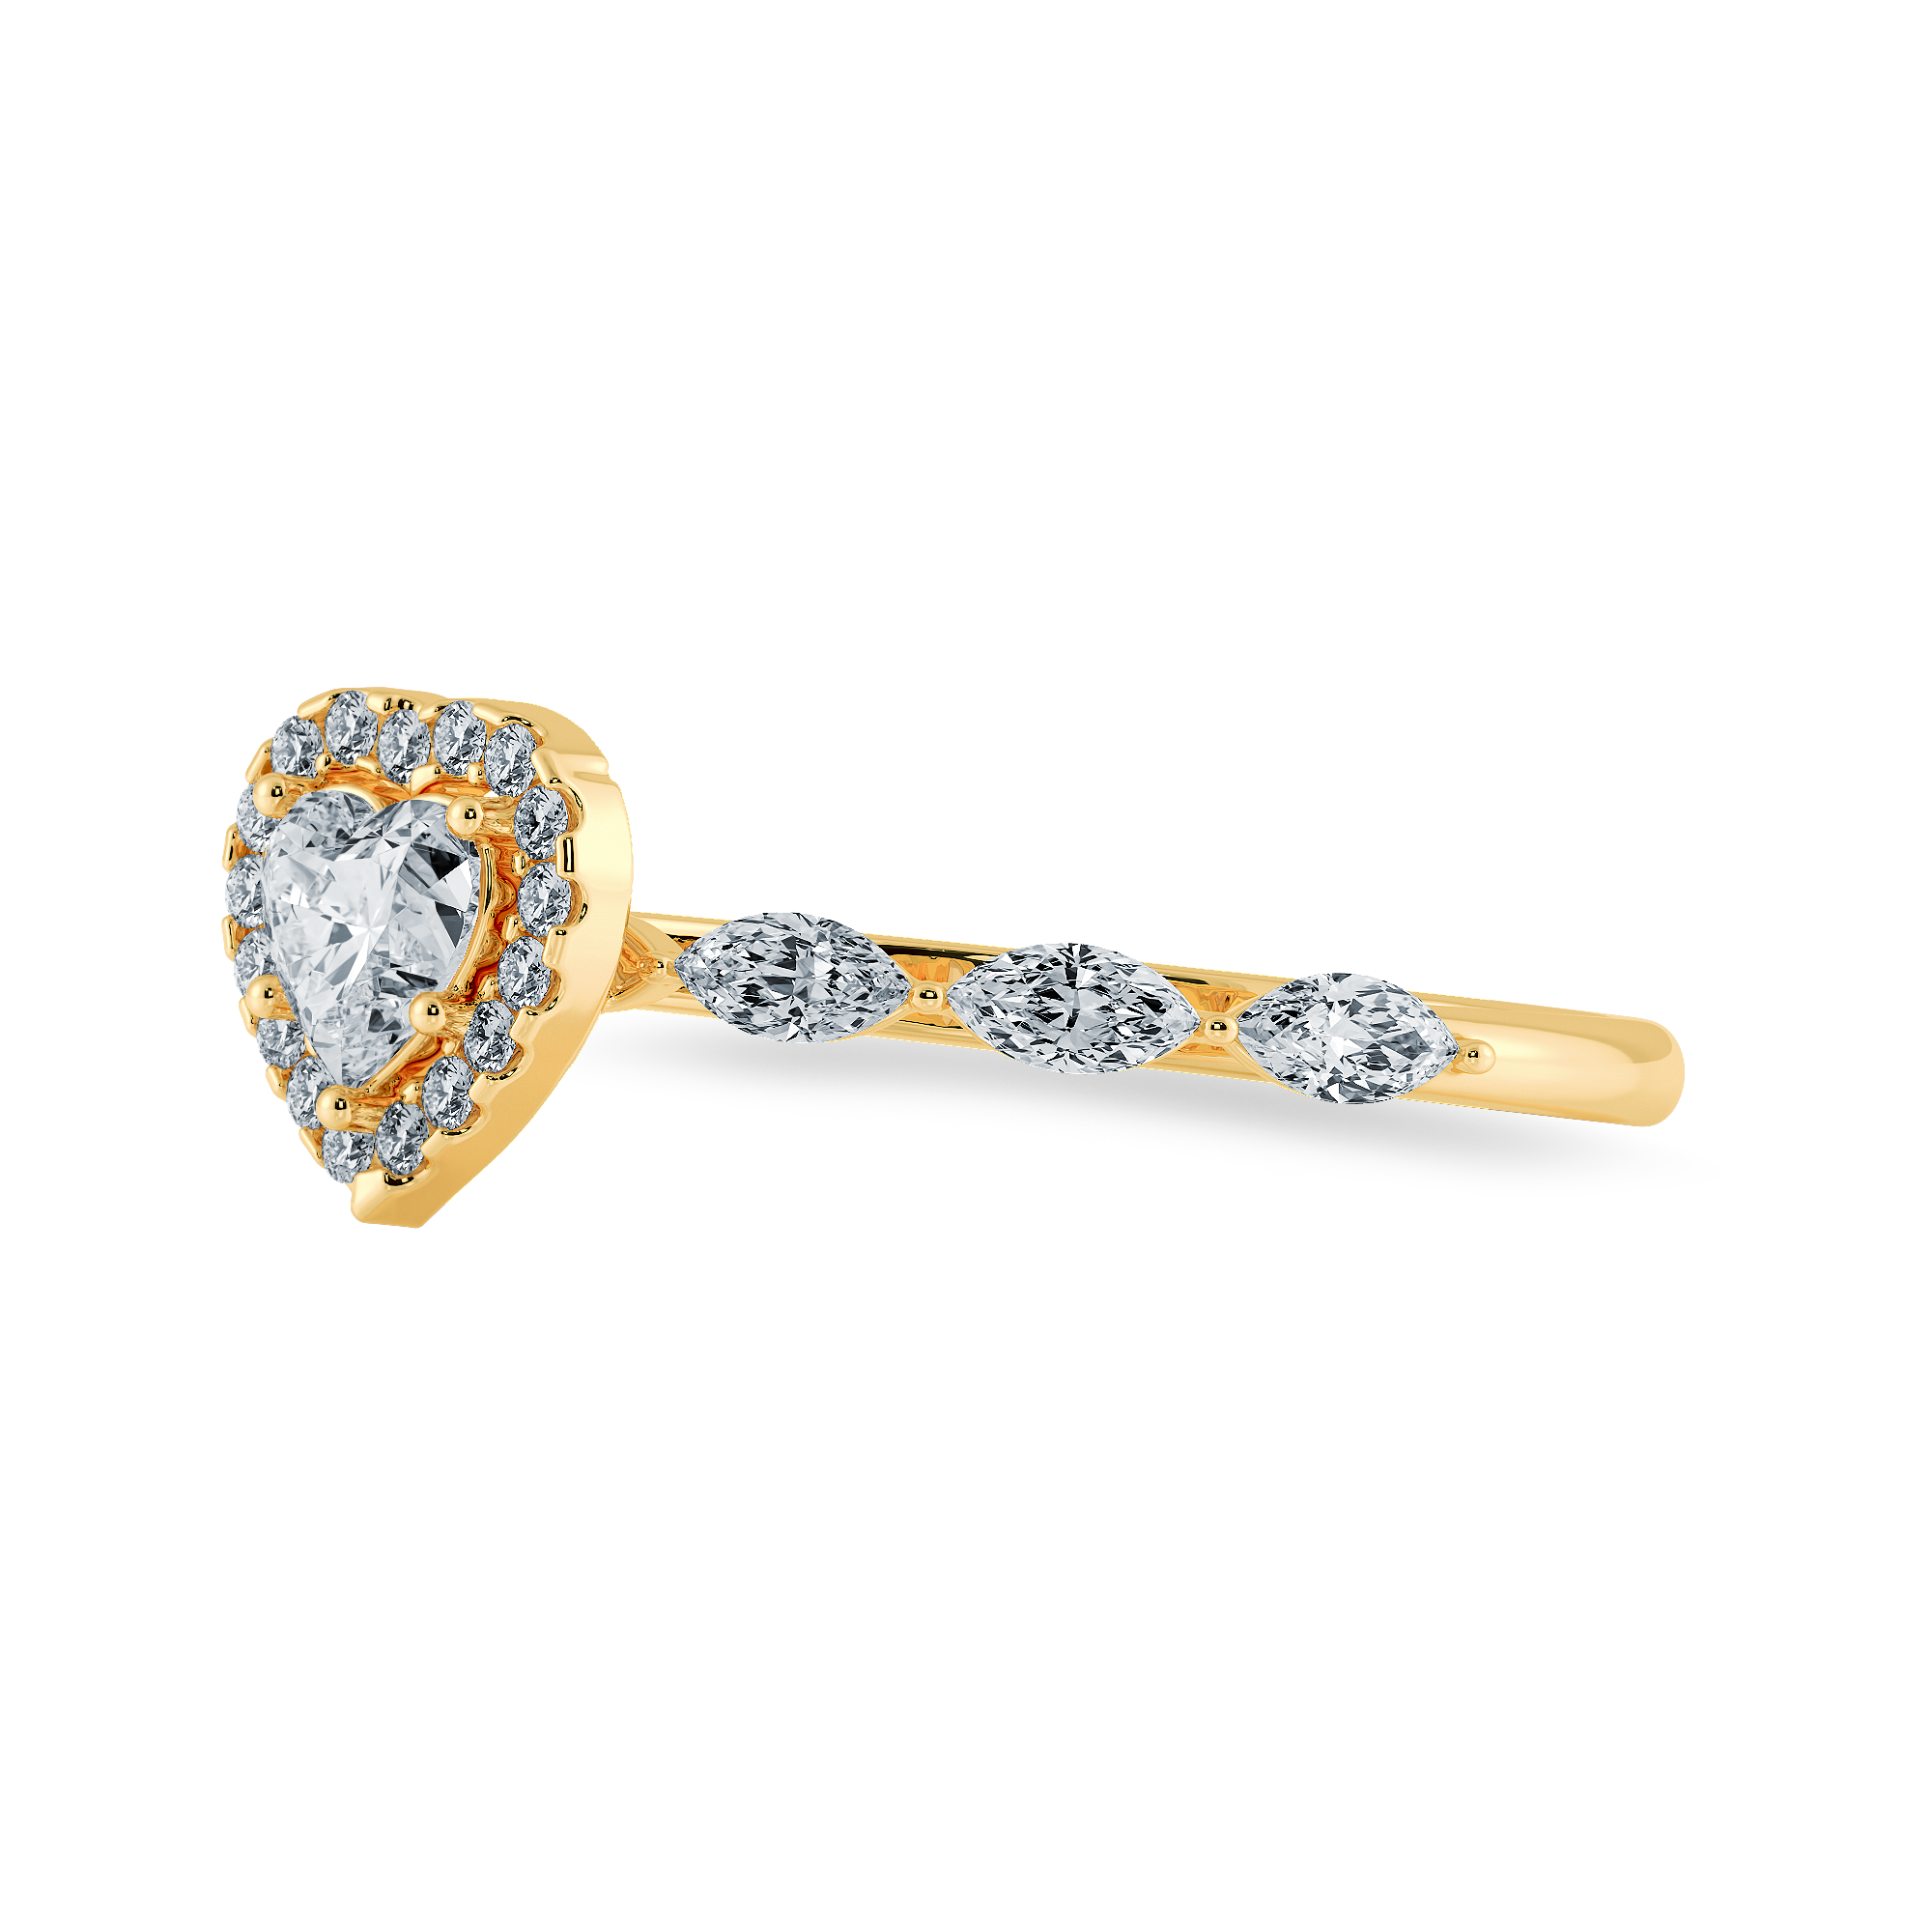 70-Pointer Heart Cut Solitaire Halo Diamonds with Marquise Diamonds Accents 18K Yellow Gold Ring JL AU 1273Y-B